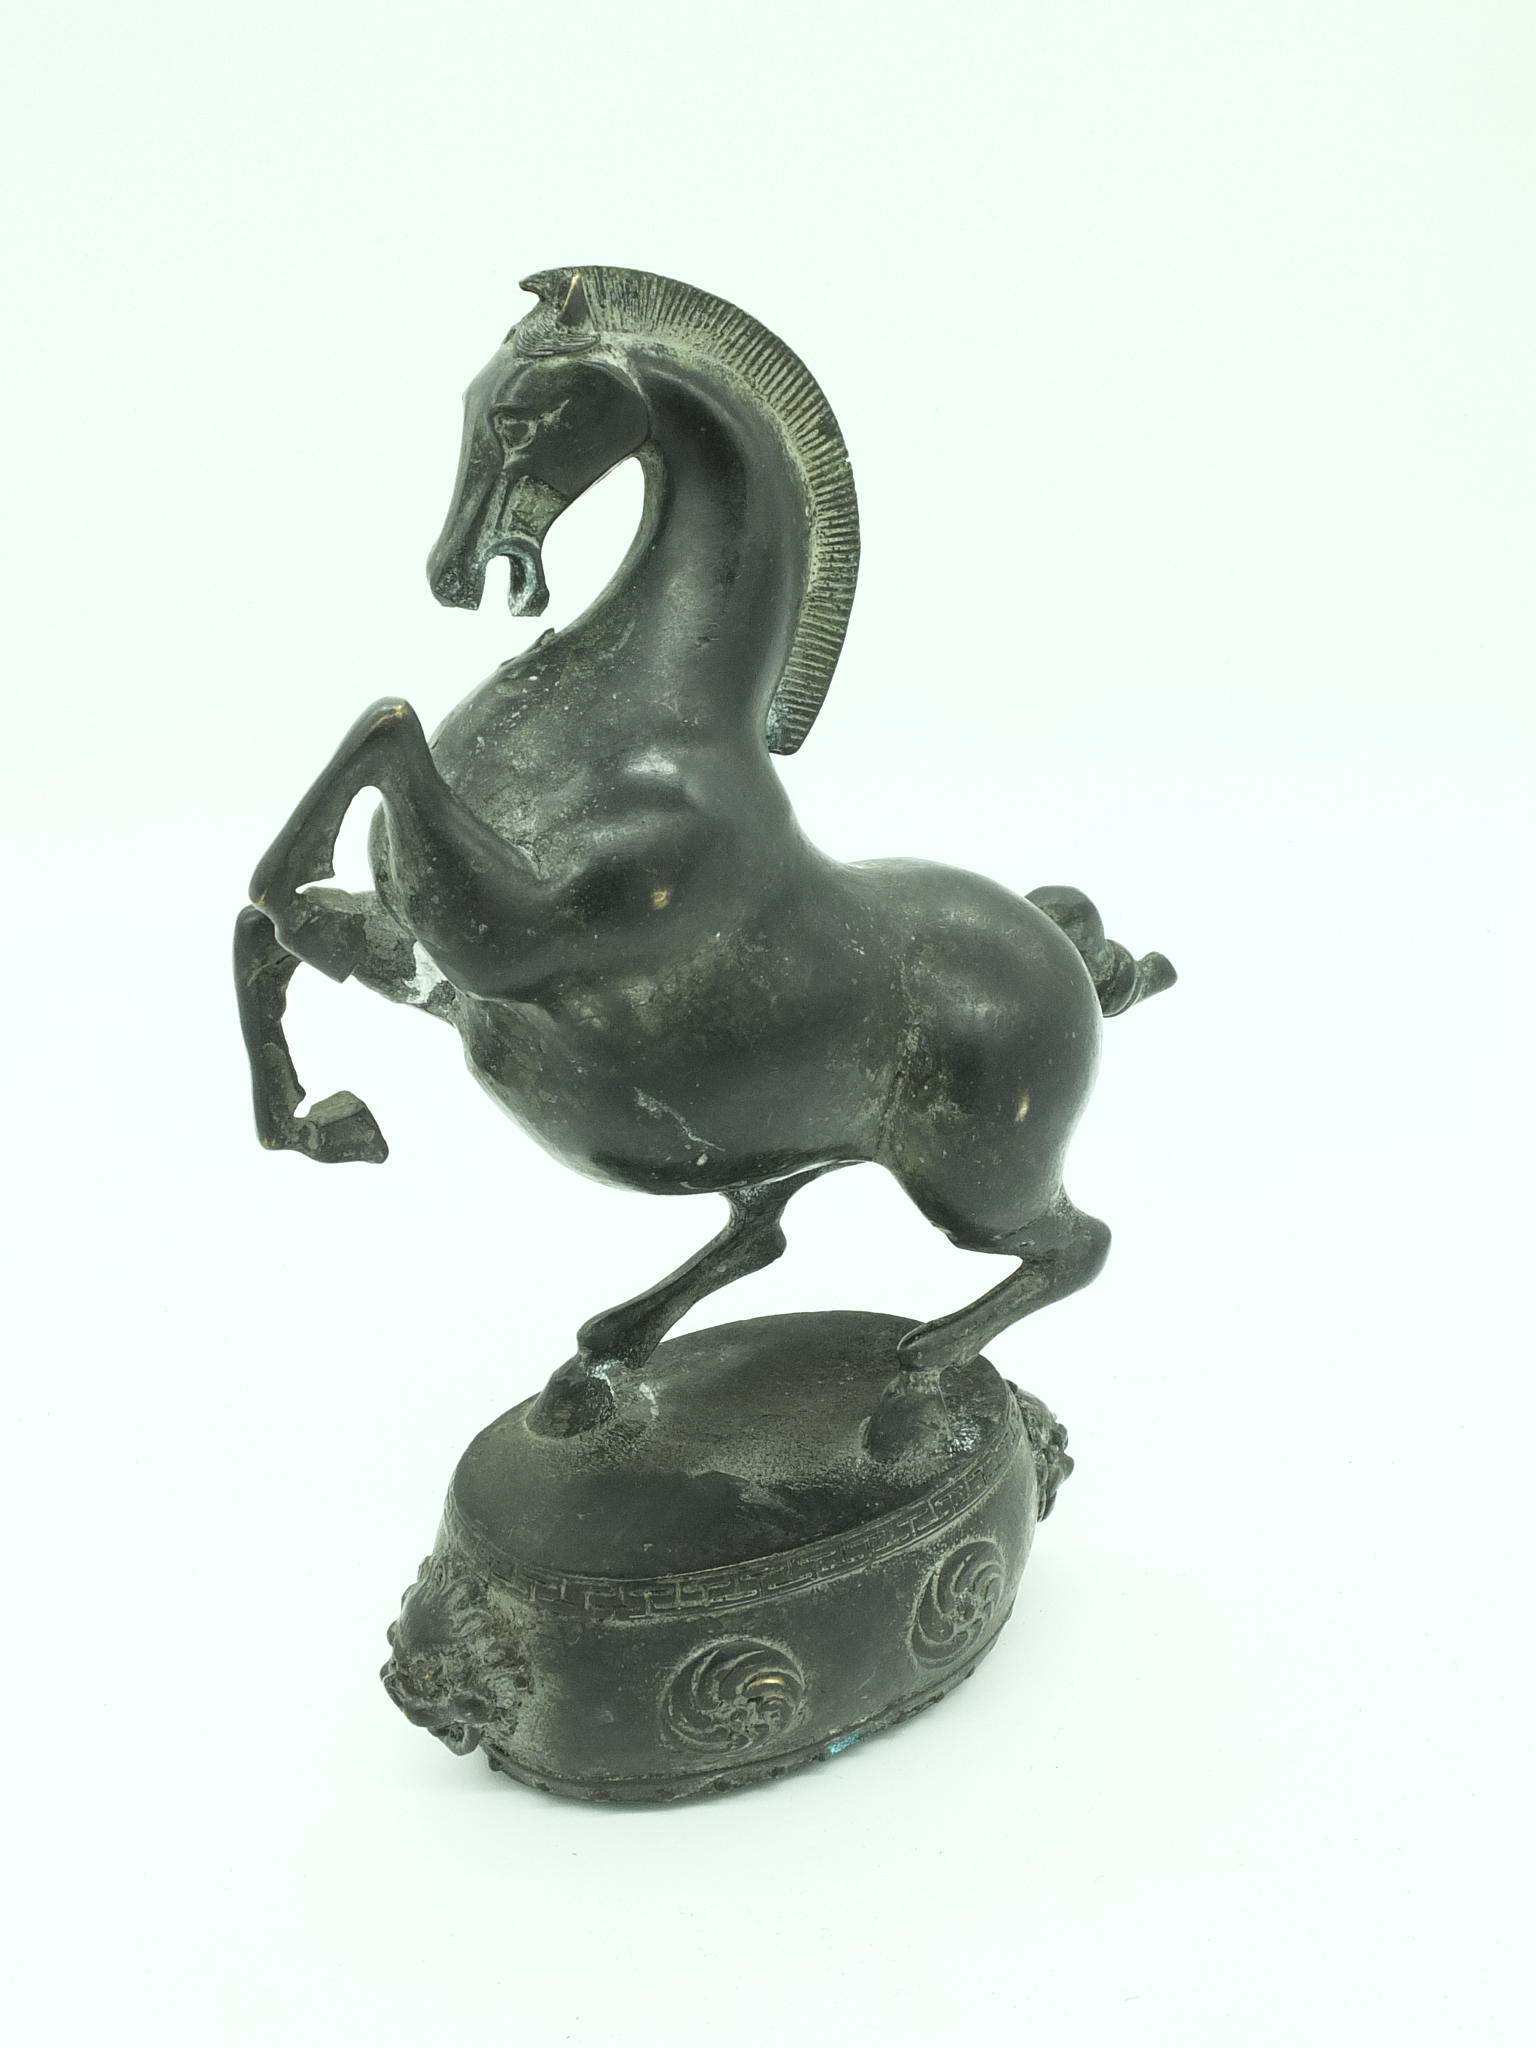 'Chinese Cast Metal Rearing Horse 20th Century'